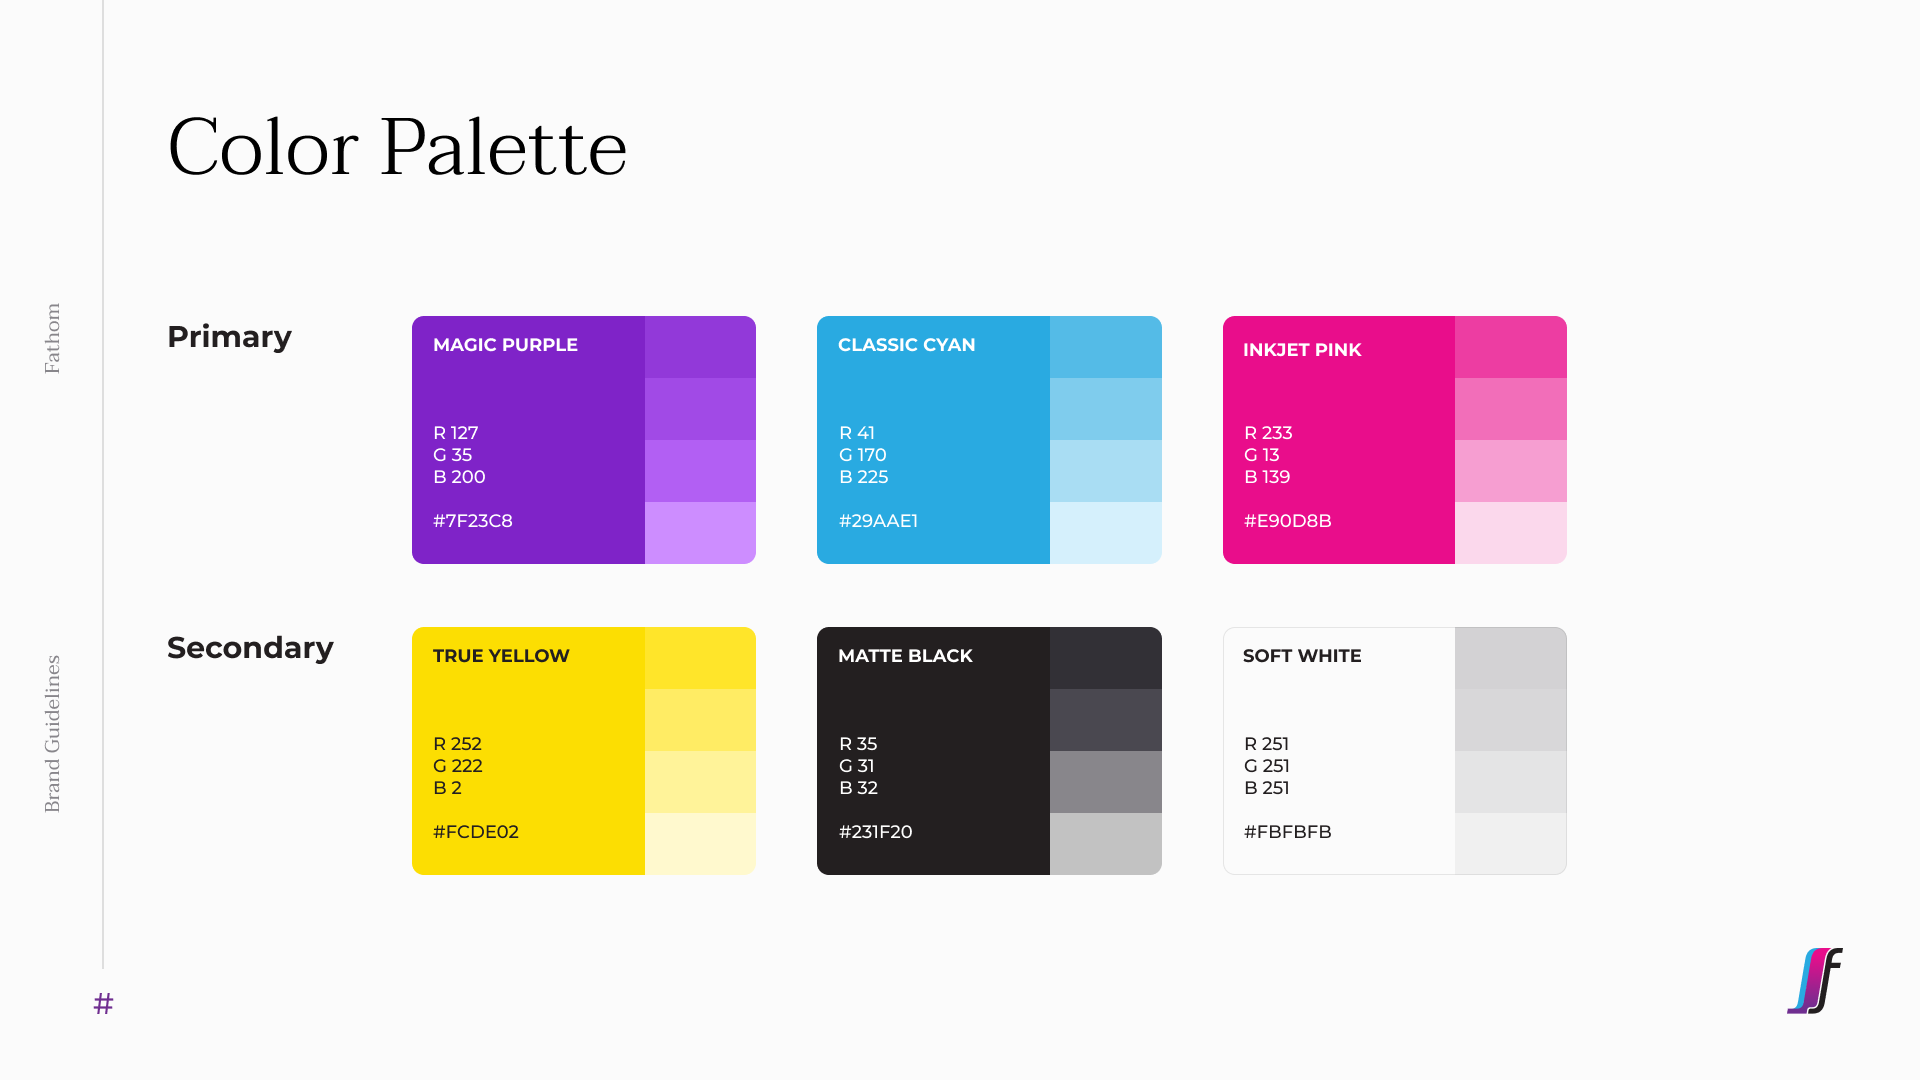 Image showing the CMYK color palette along with a B/W neutral color that we used in this project.